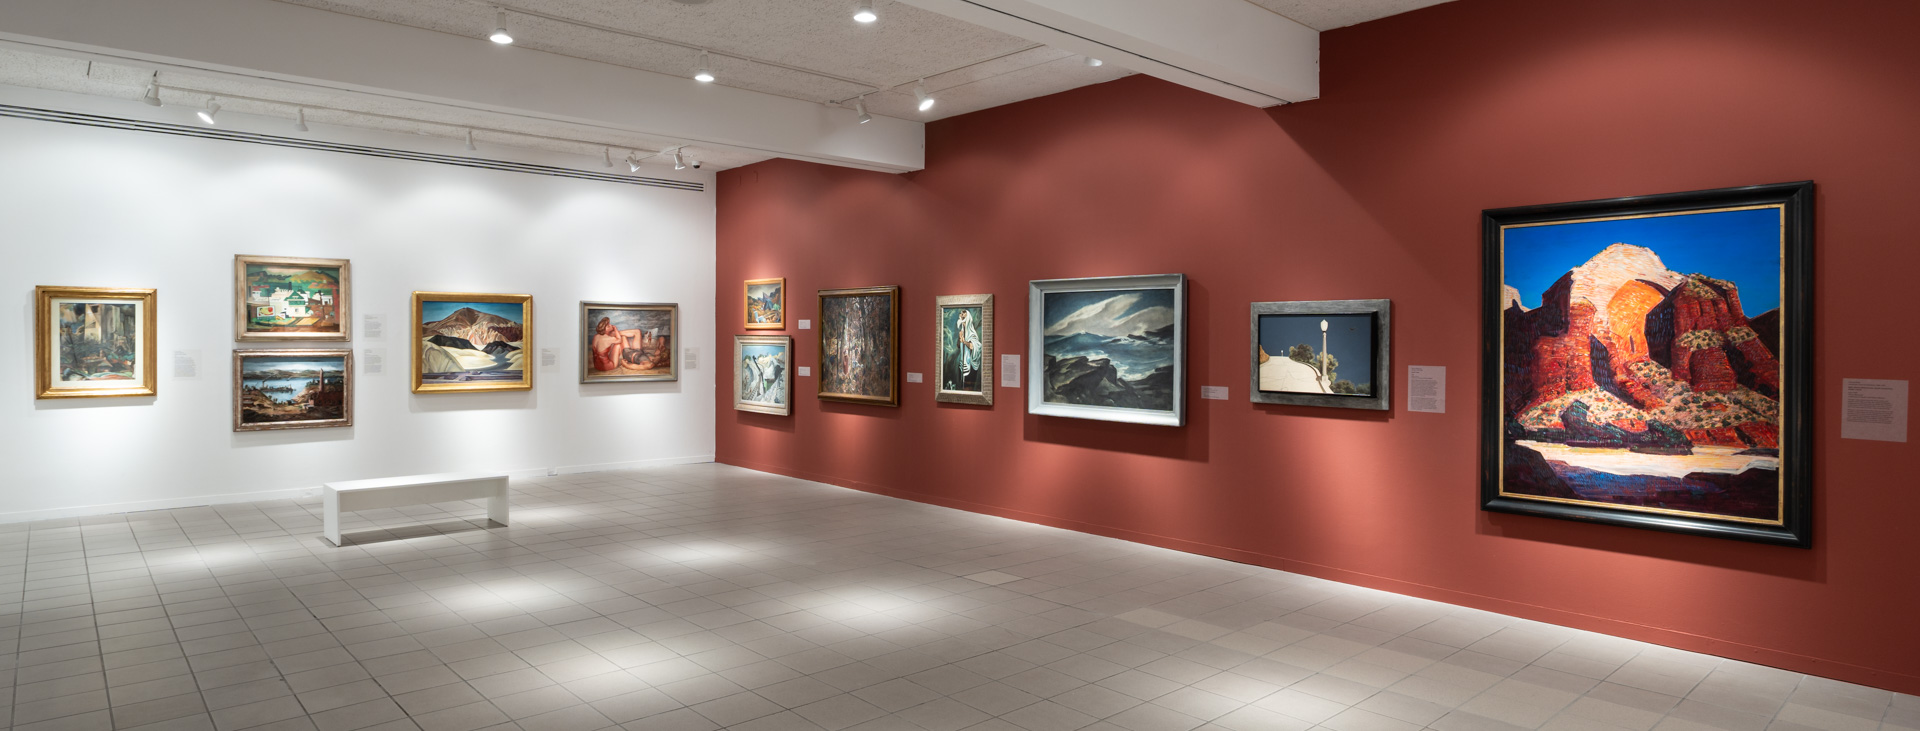 Art for the People: WPA-Era Paintings from the Dijkstra Collection installed at OMA